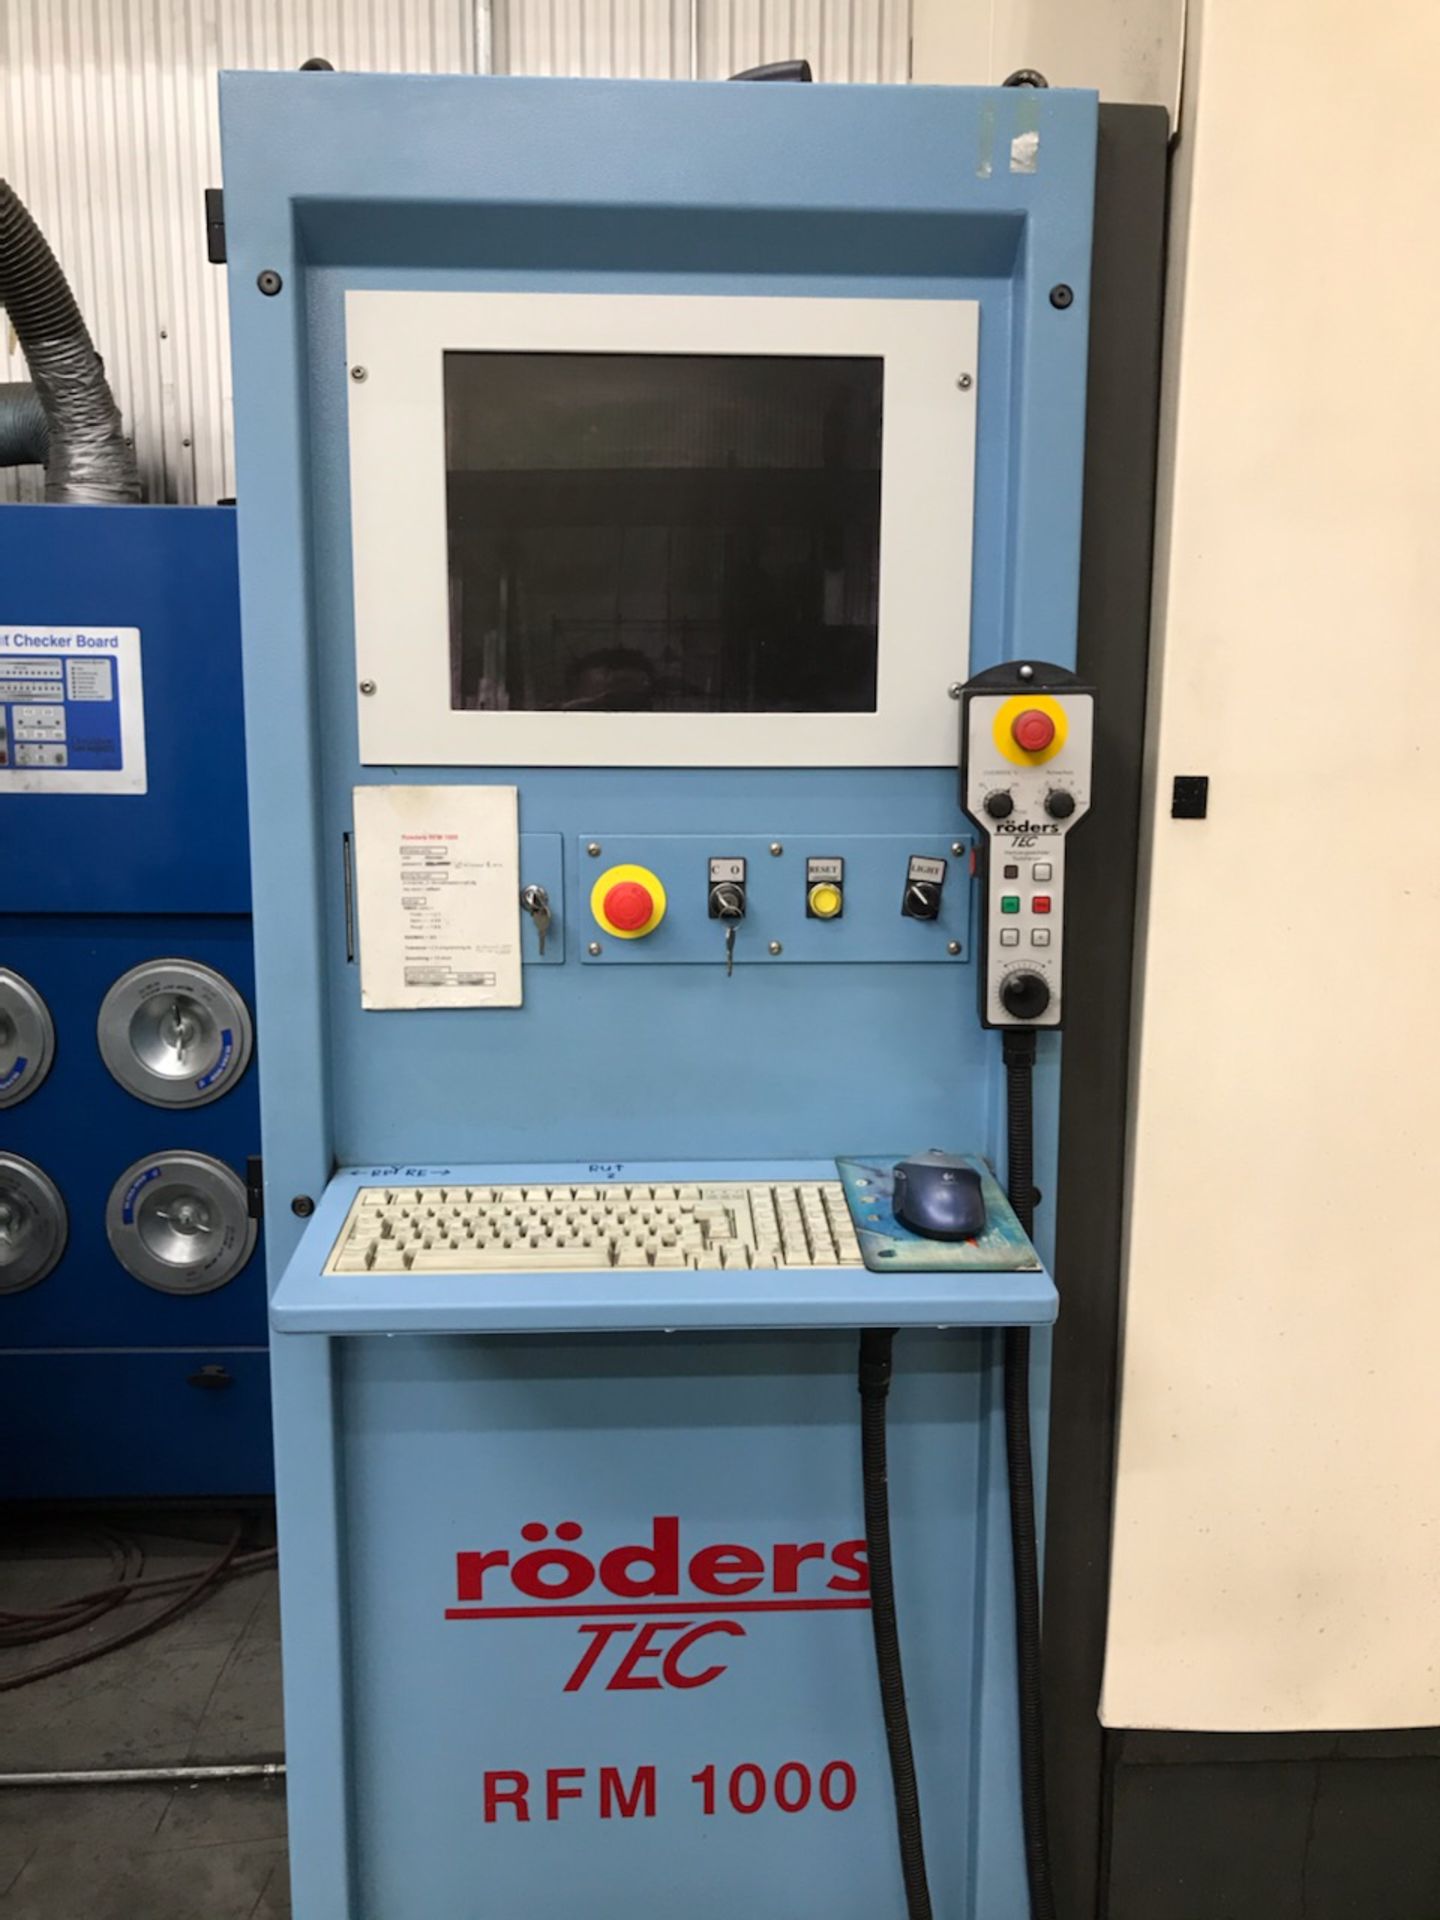 Roders RFM 1000 CNC 3-Axis Vertical Machining Center, S/N 10722-65 - Image 3 of 16